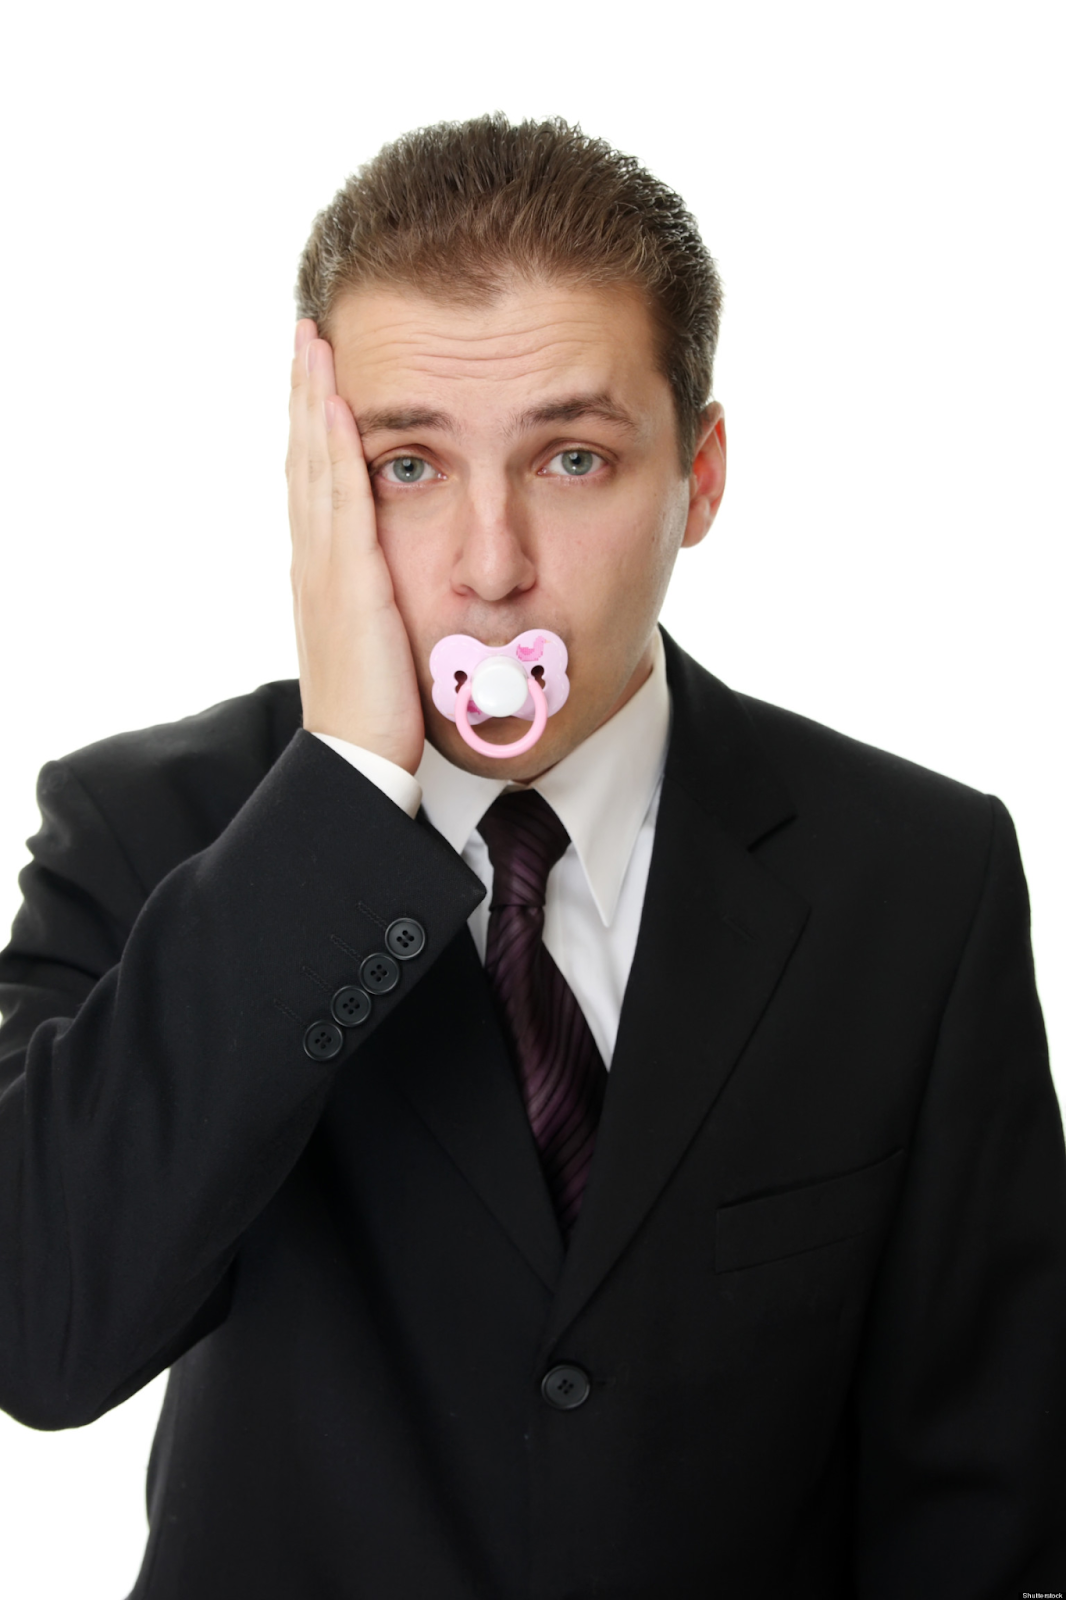 4 Effective Ways Adult Pacifiers Provide Anxiety Relief